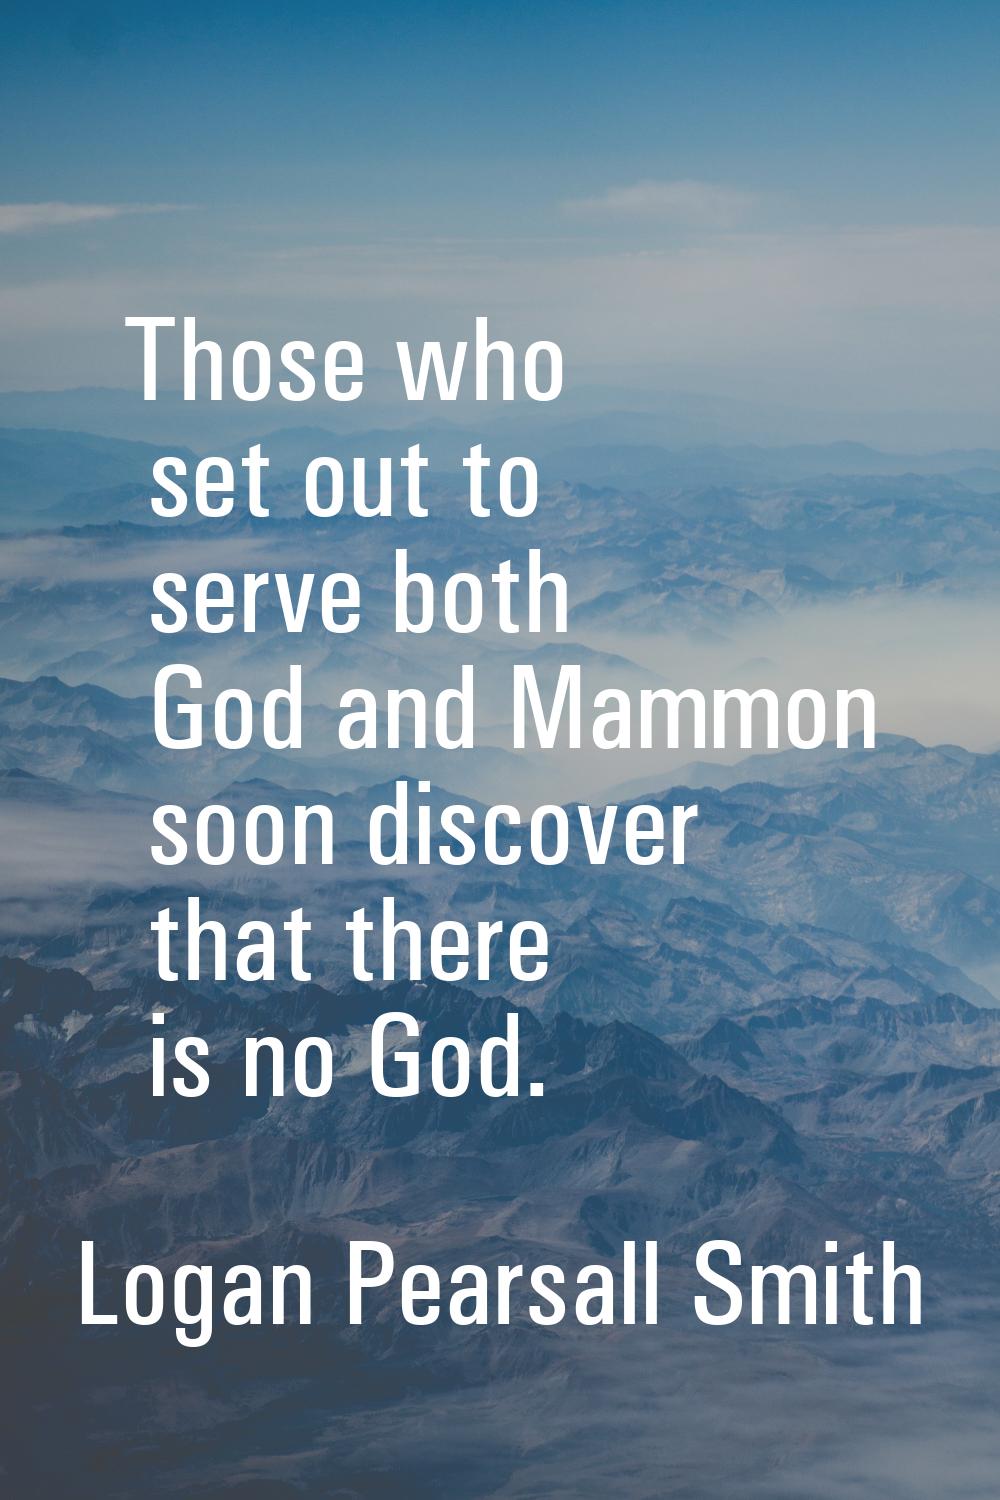 Those who set out to serve both God and Mammon soon discover that there is no God.